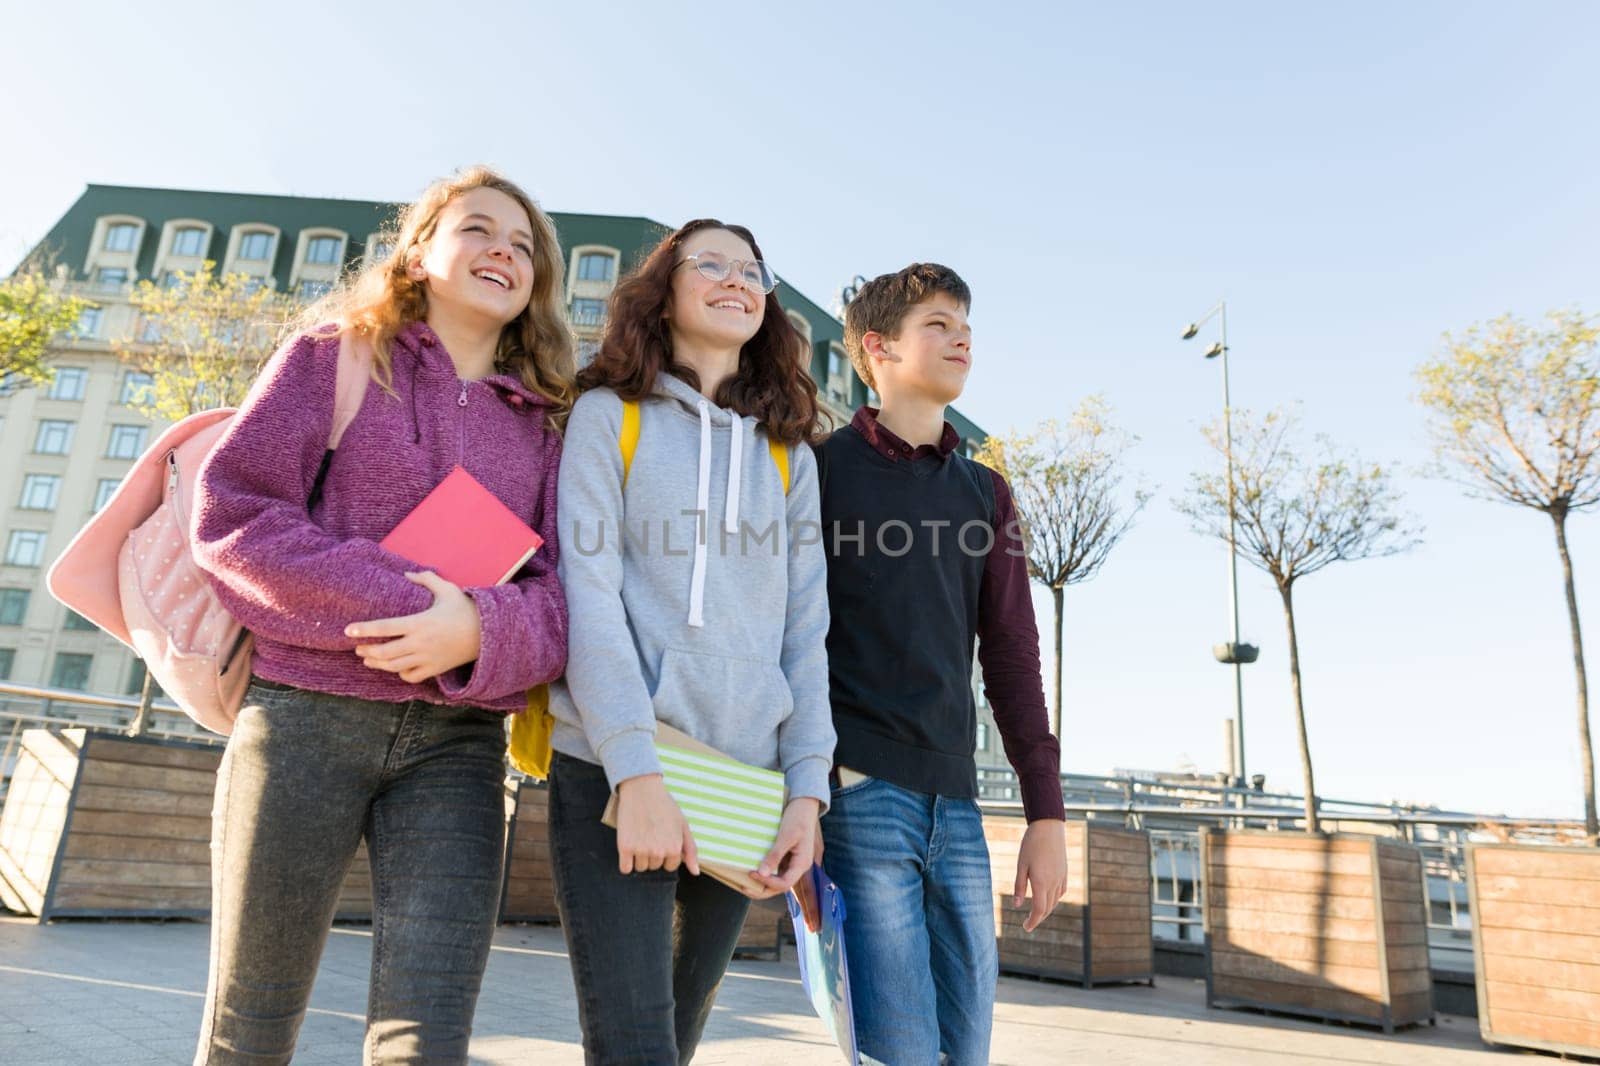 Smiling teens students with backpacks and textbooks, talking and going forward. City background, golden hour